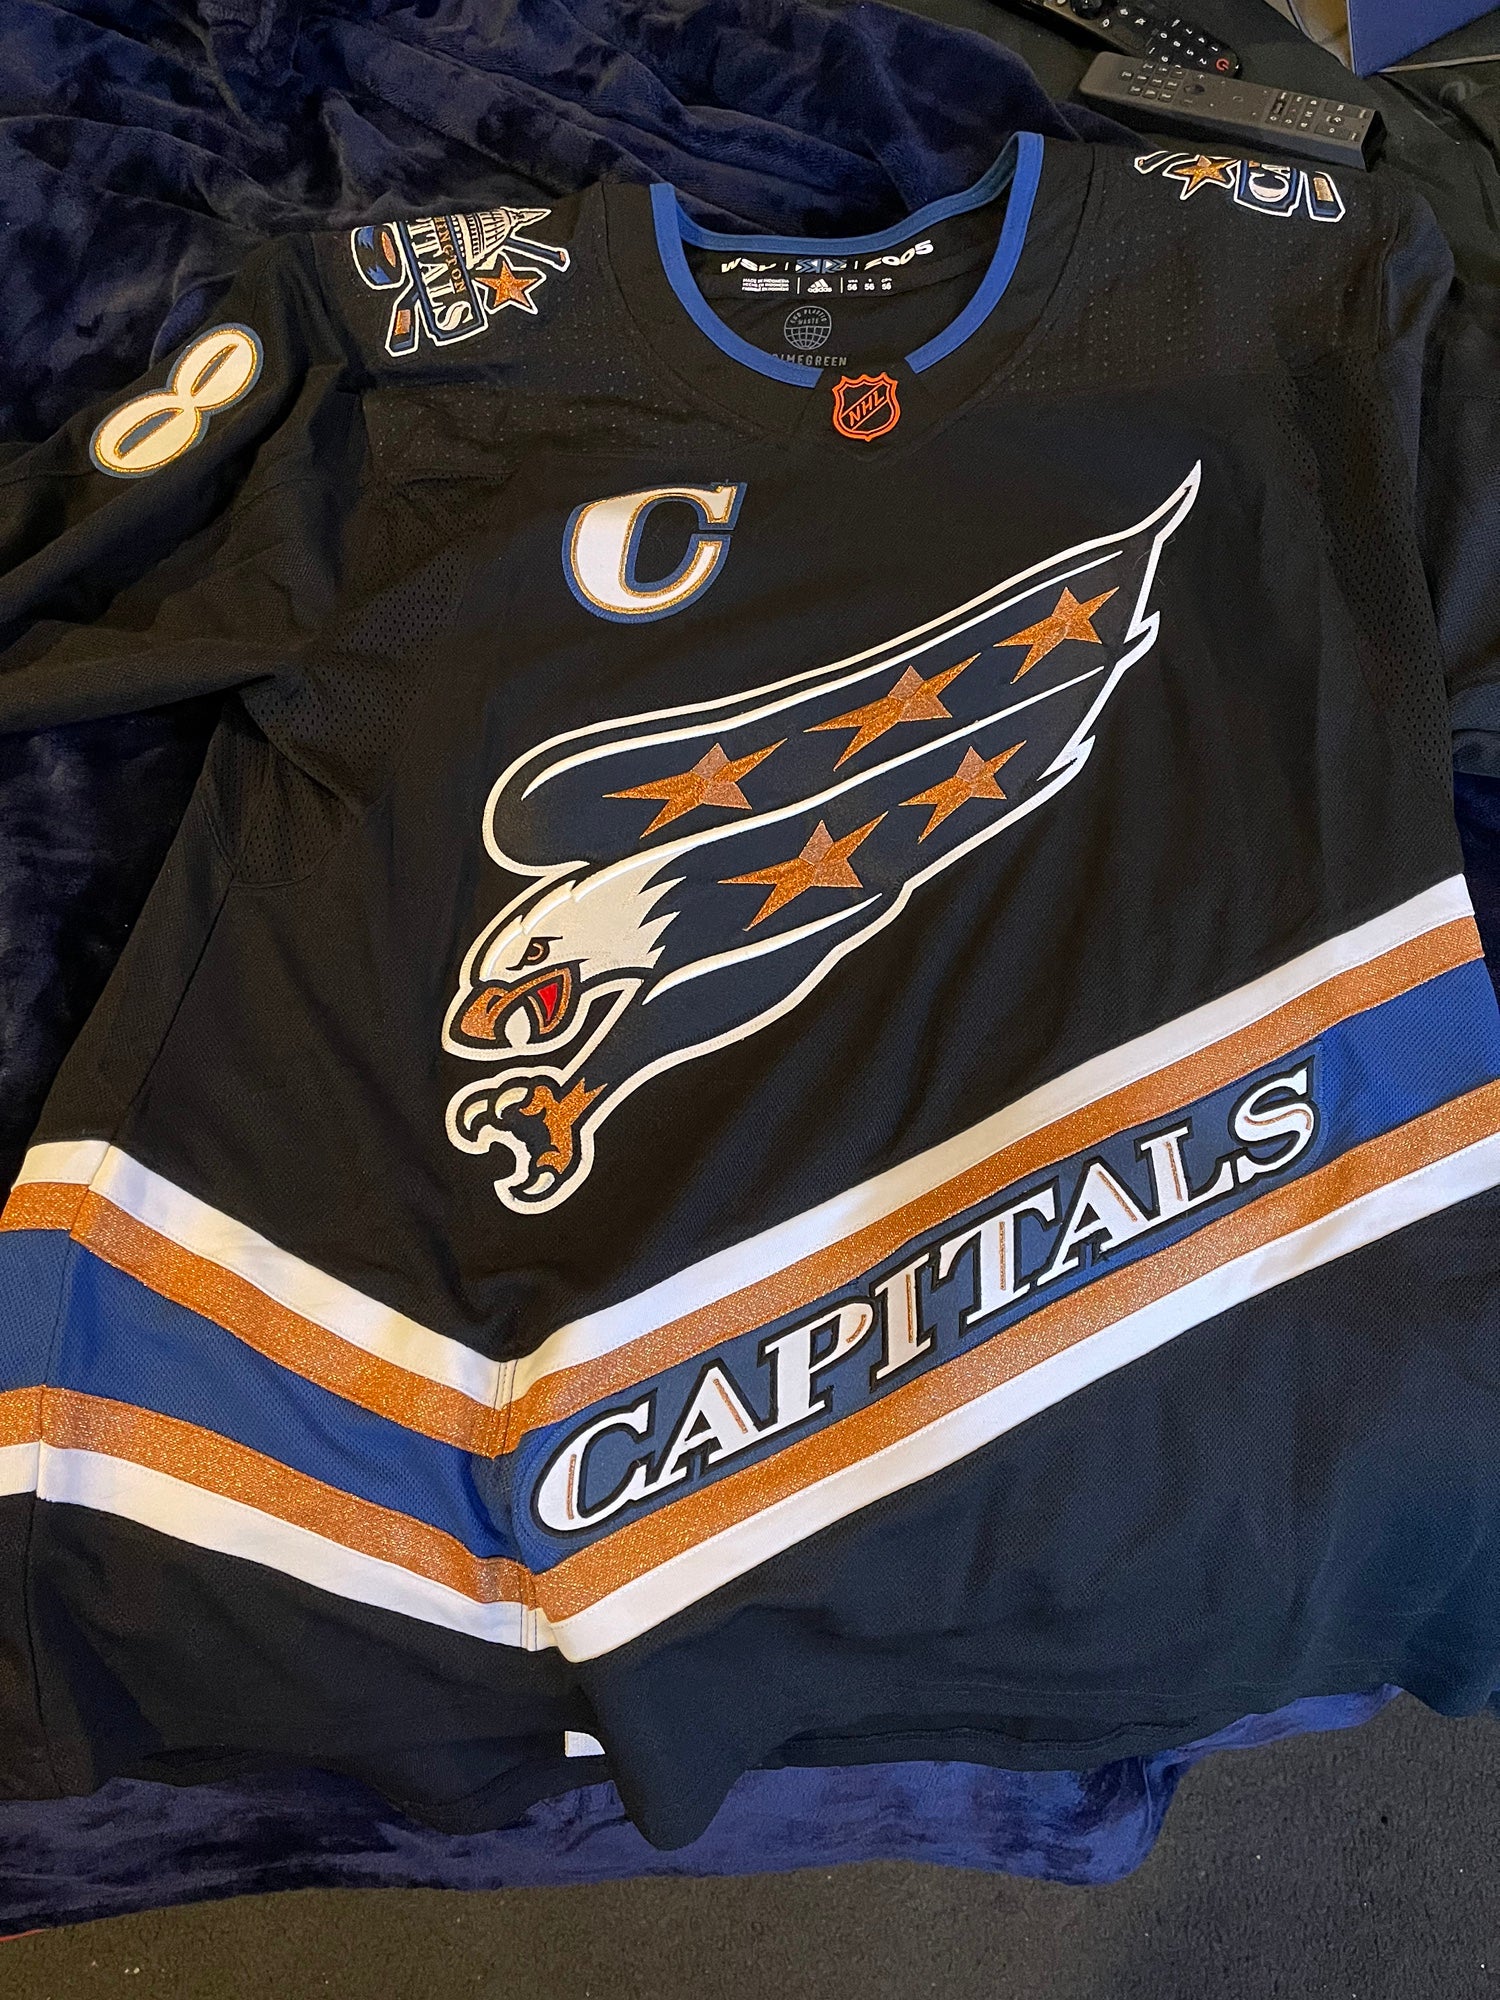 Looking to sell this Jack Eichel Reverse Retro Jersey, size 52. DM